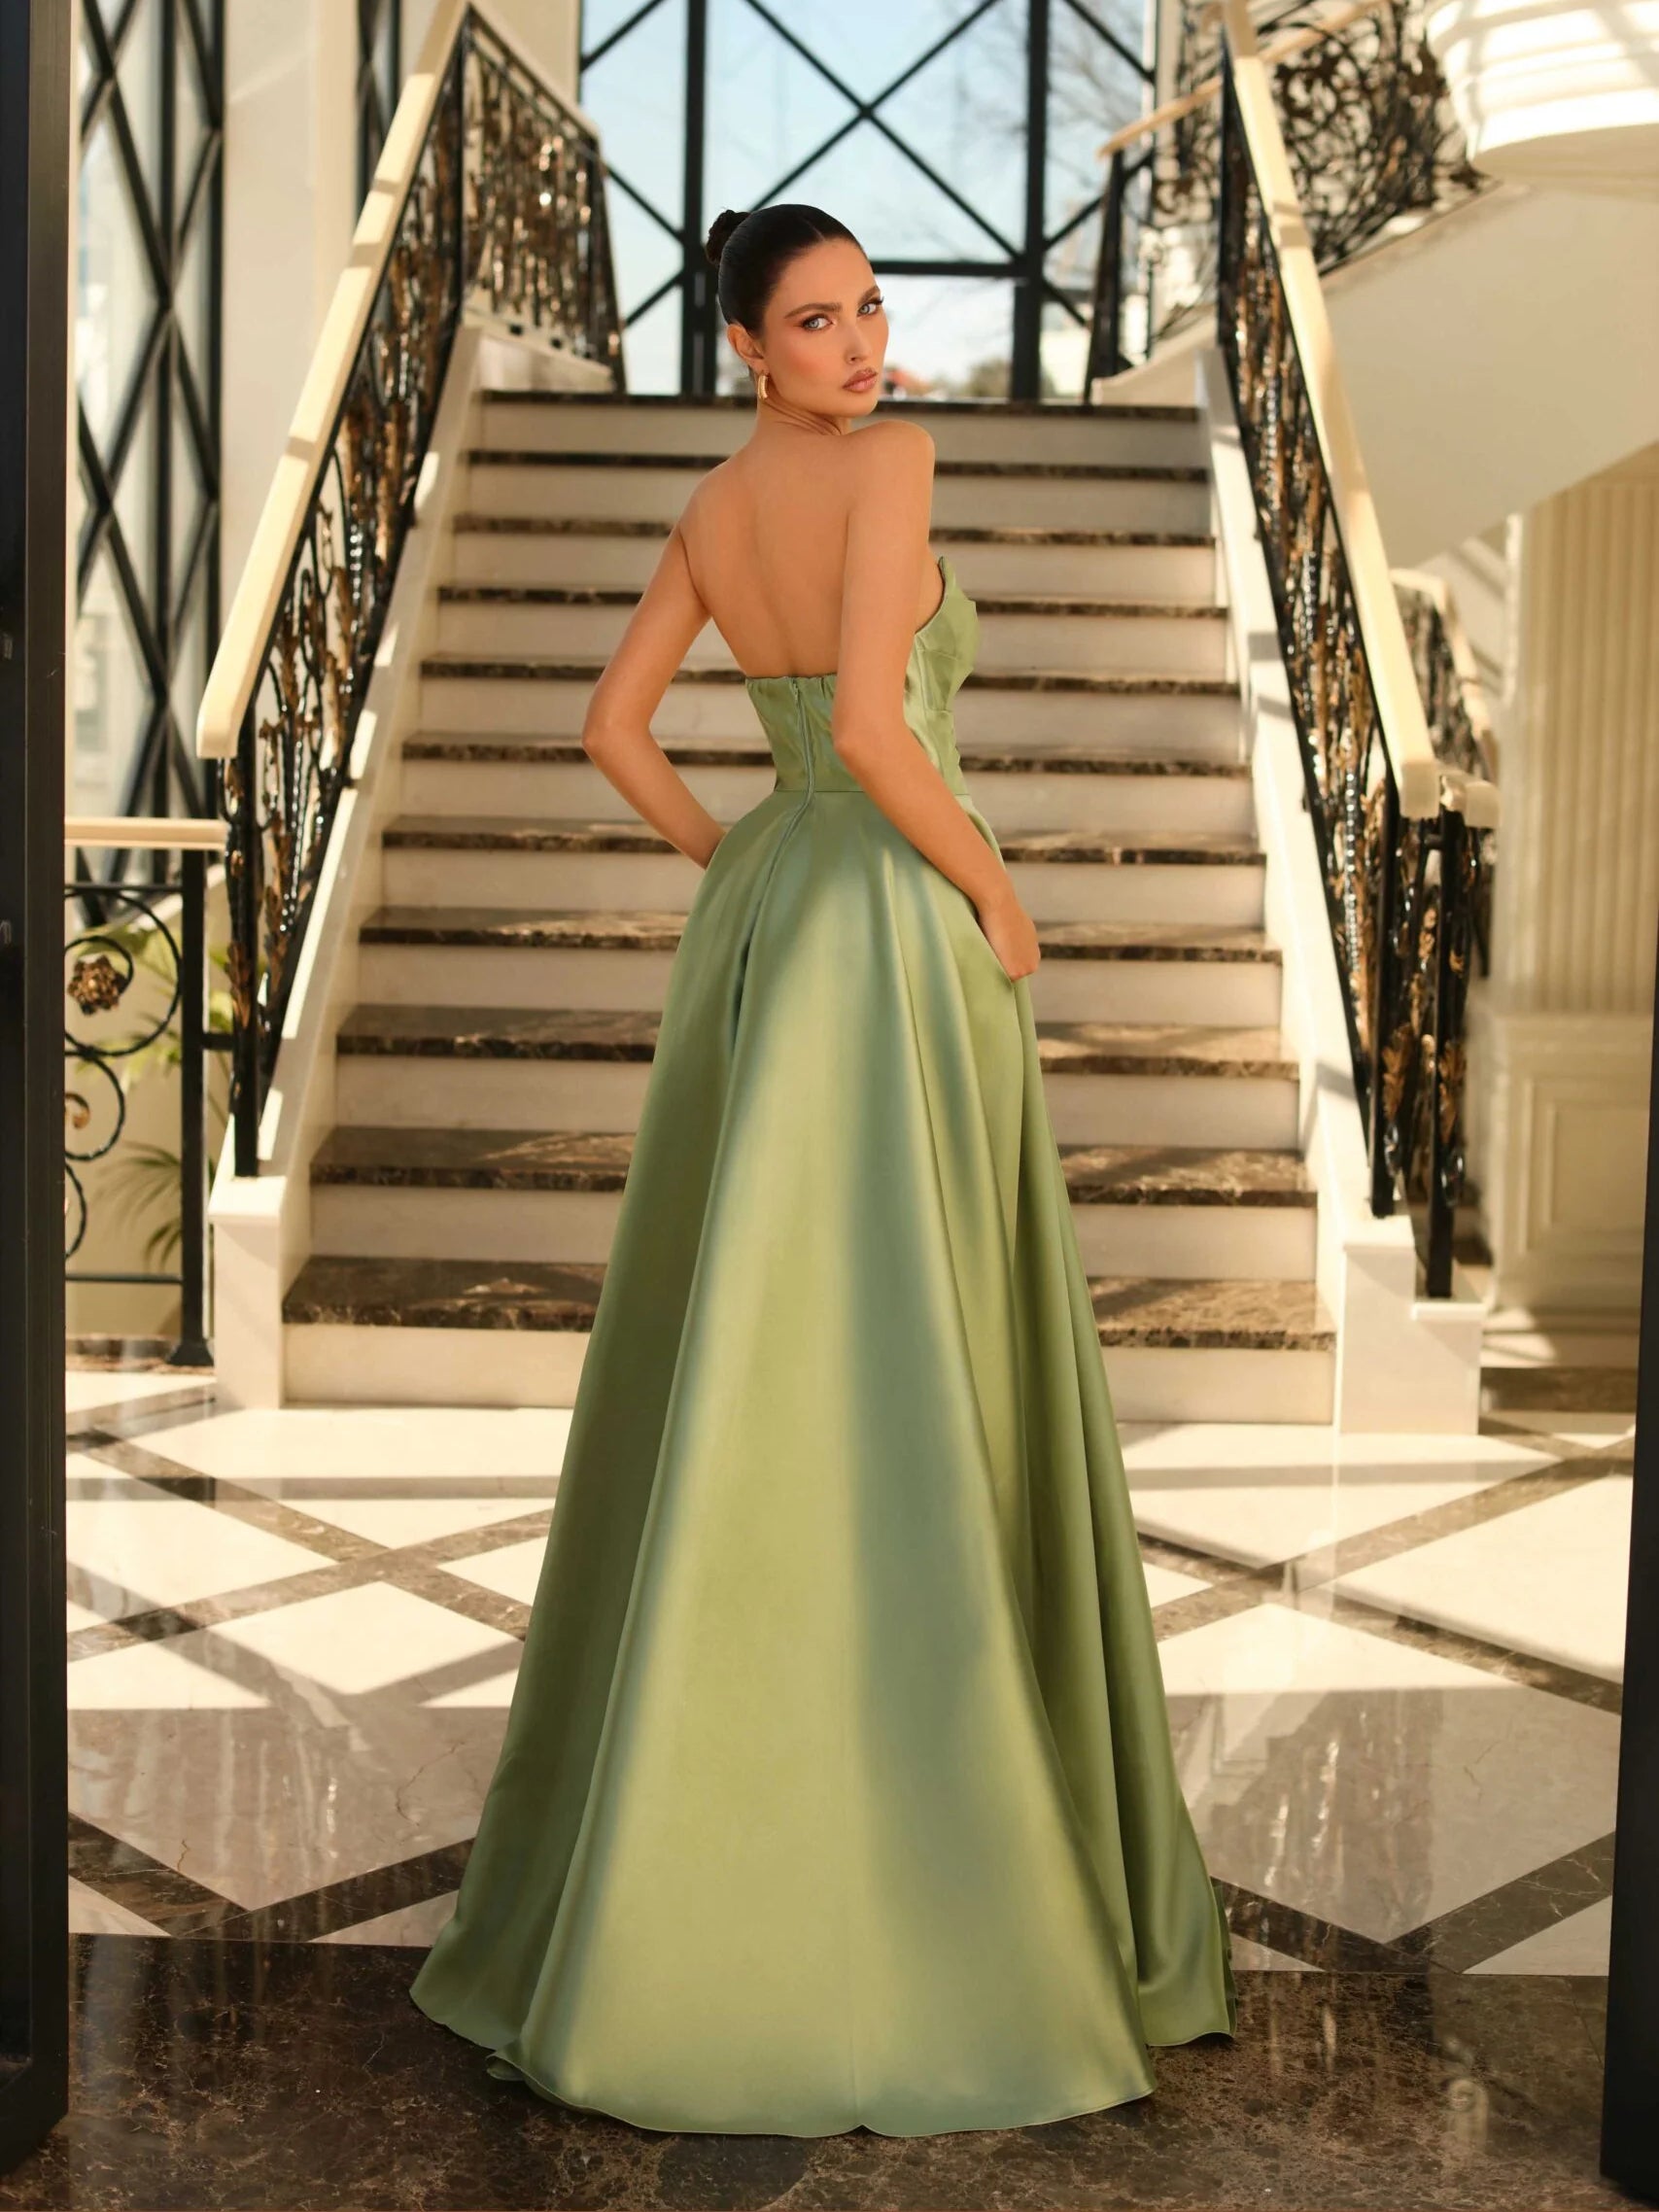 Strapless A-line Satin Prom Dresses, Newest Prom Dresses, 2024 Prom Dresses, Evening Dresses, Graduation Party Dresses